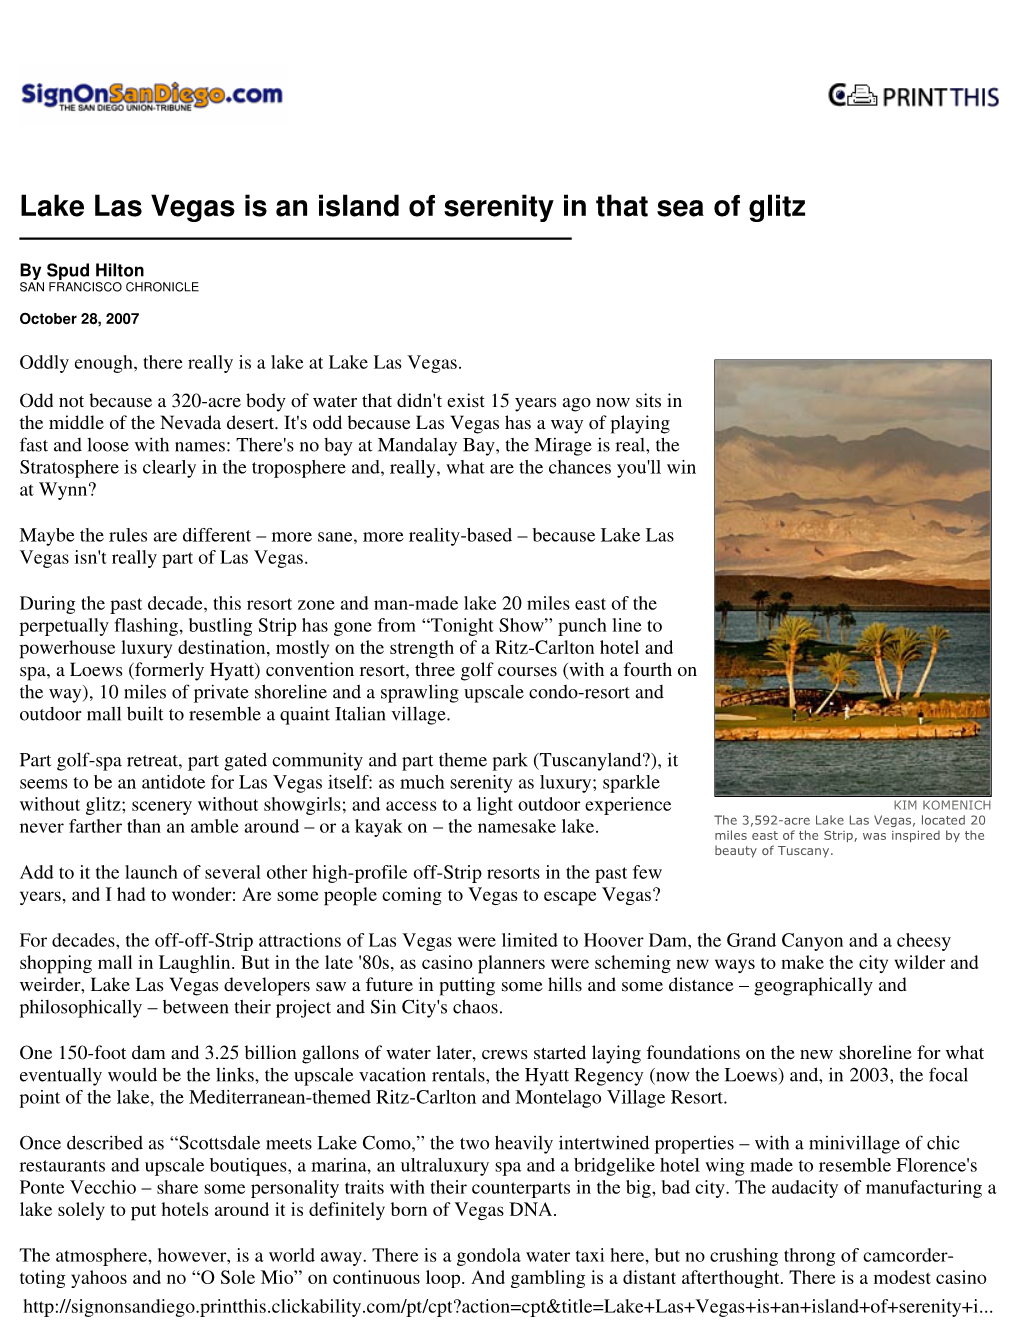 Lake Las Vegas Is an Island of Serenity in That Sea of Glitz